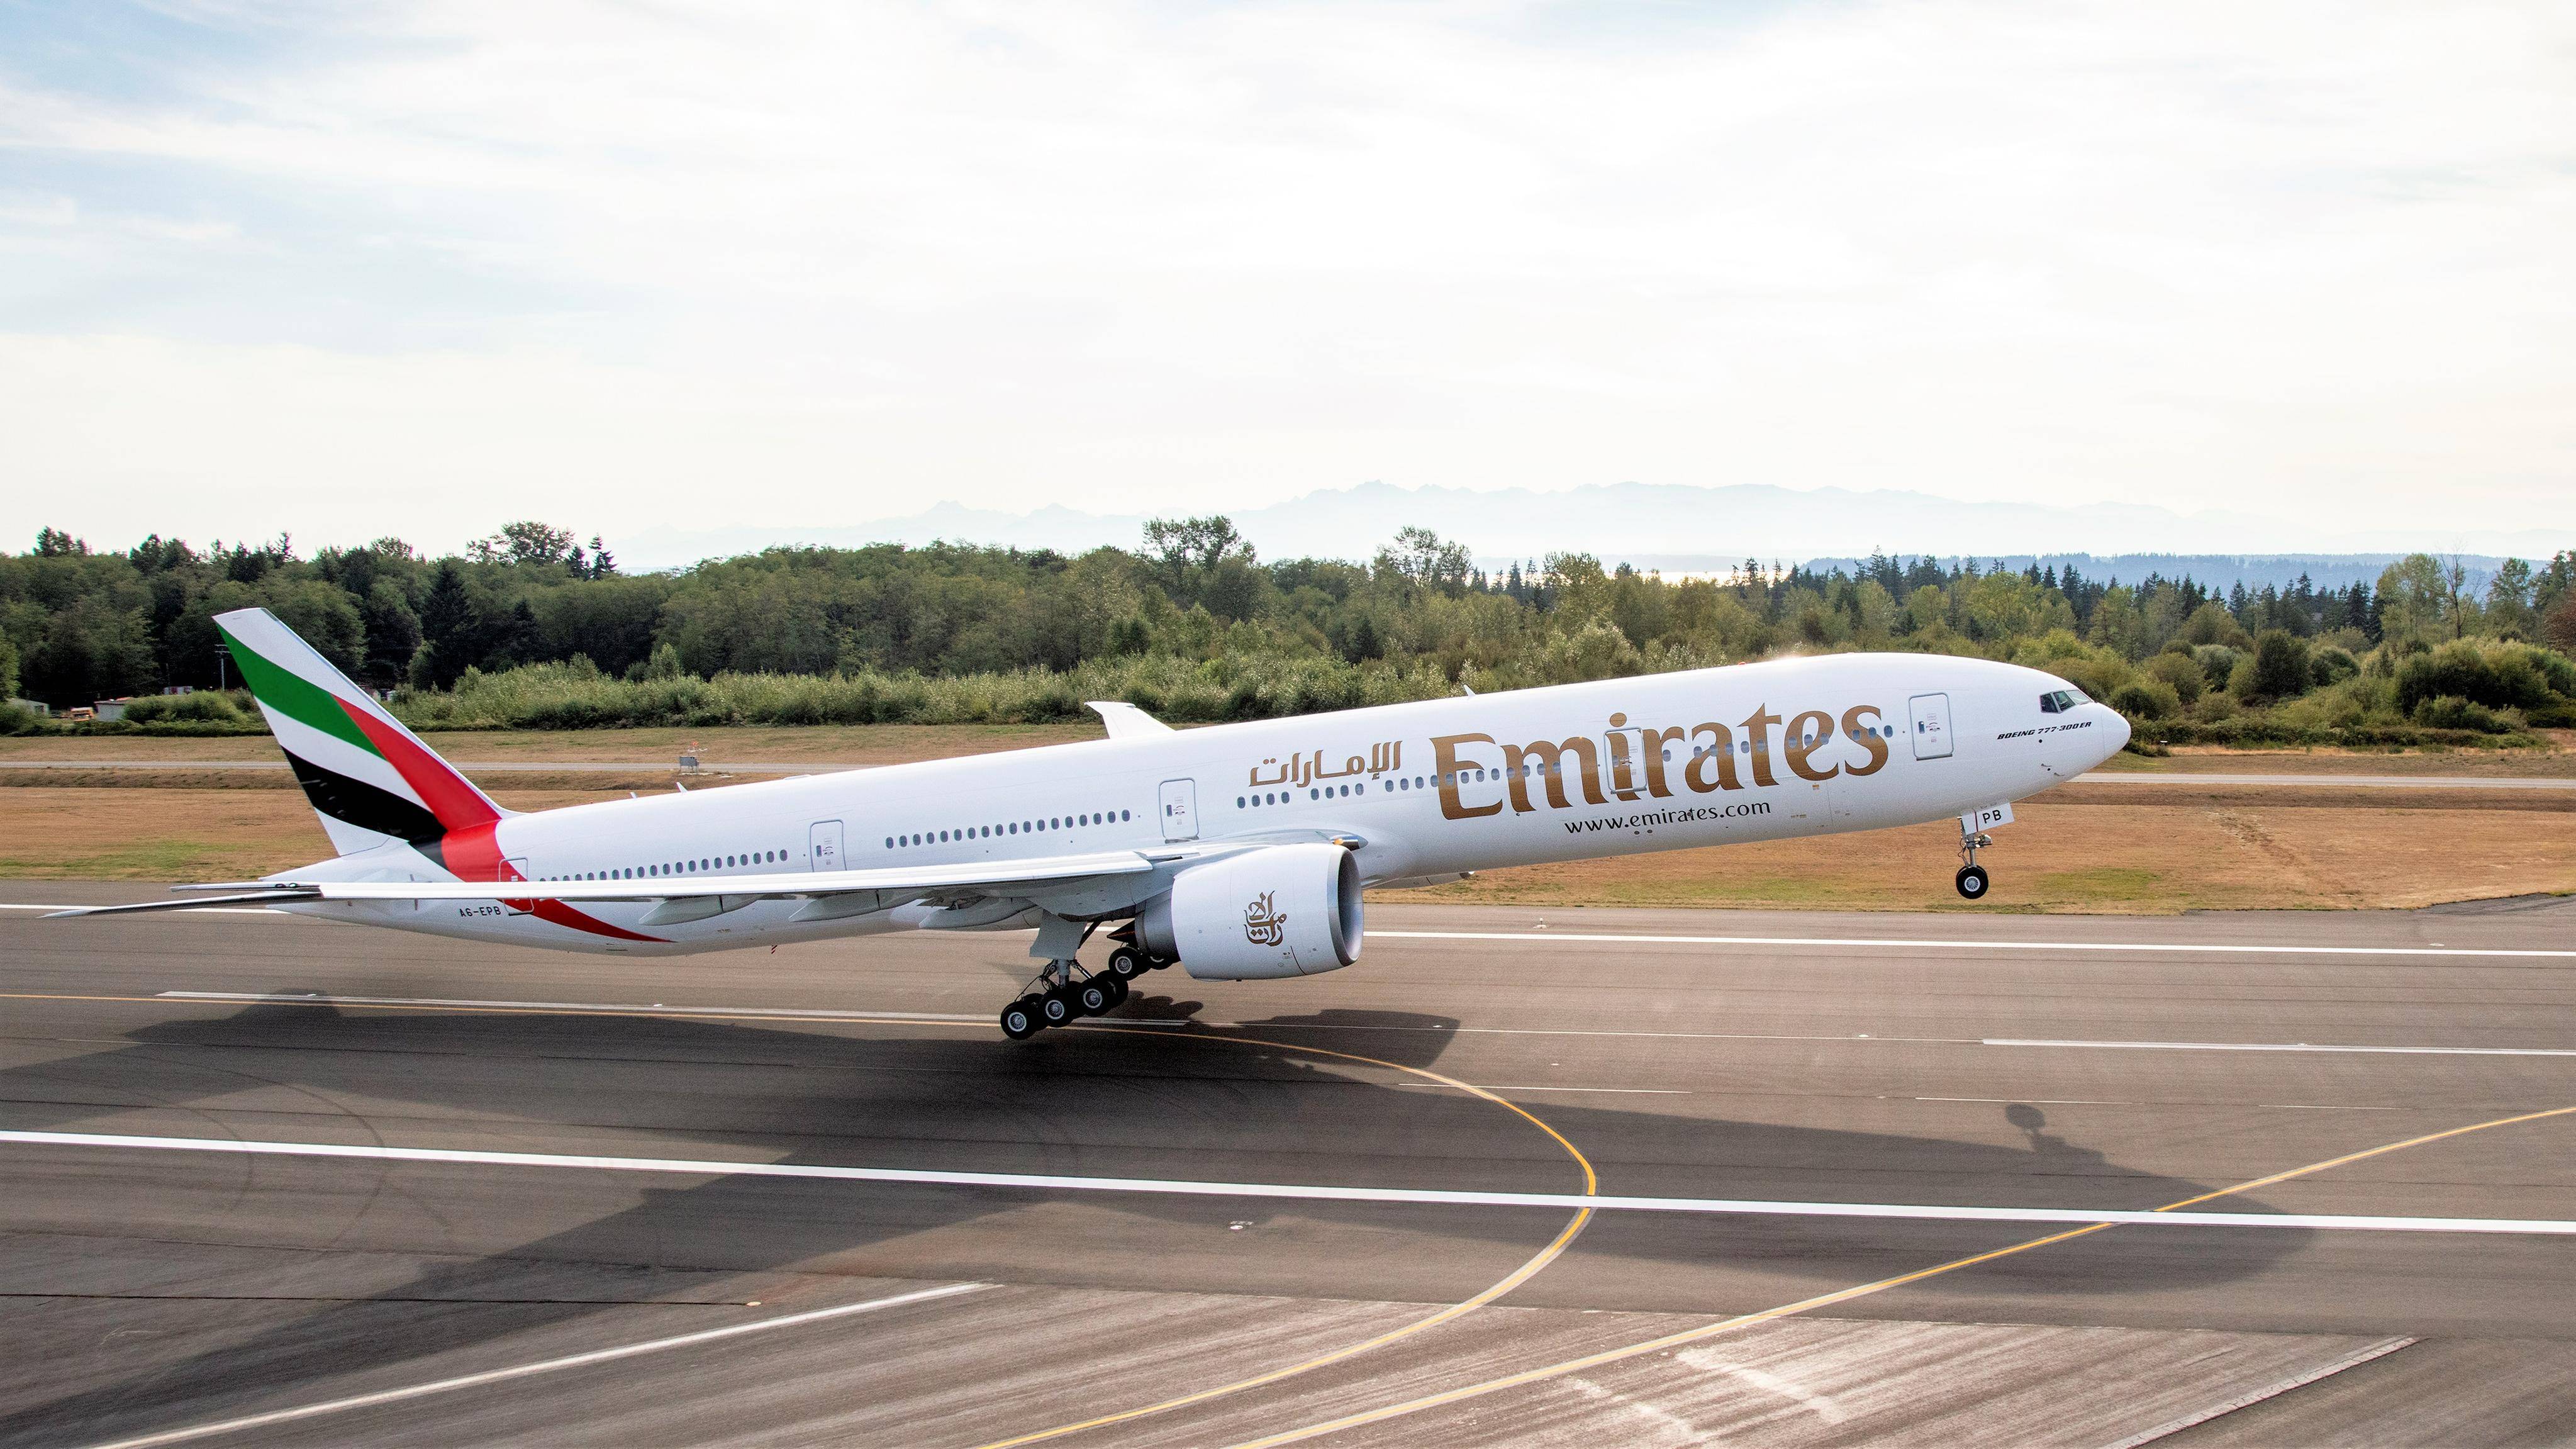 Emirates to resume flights to Mexico City via Barcelona from July 2 – News